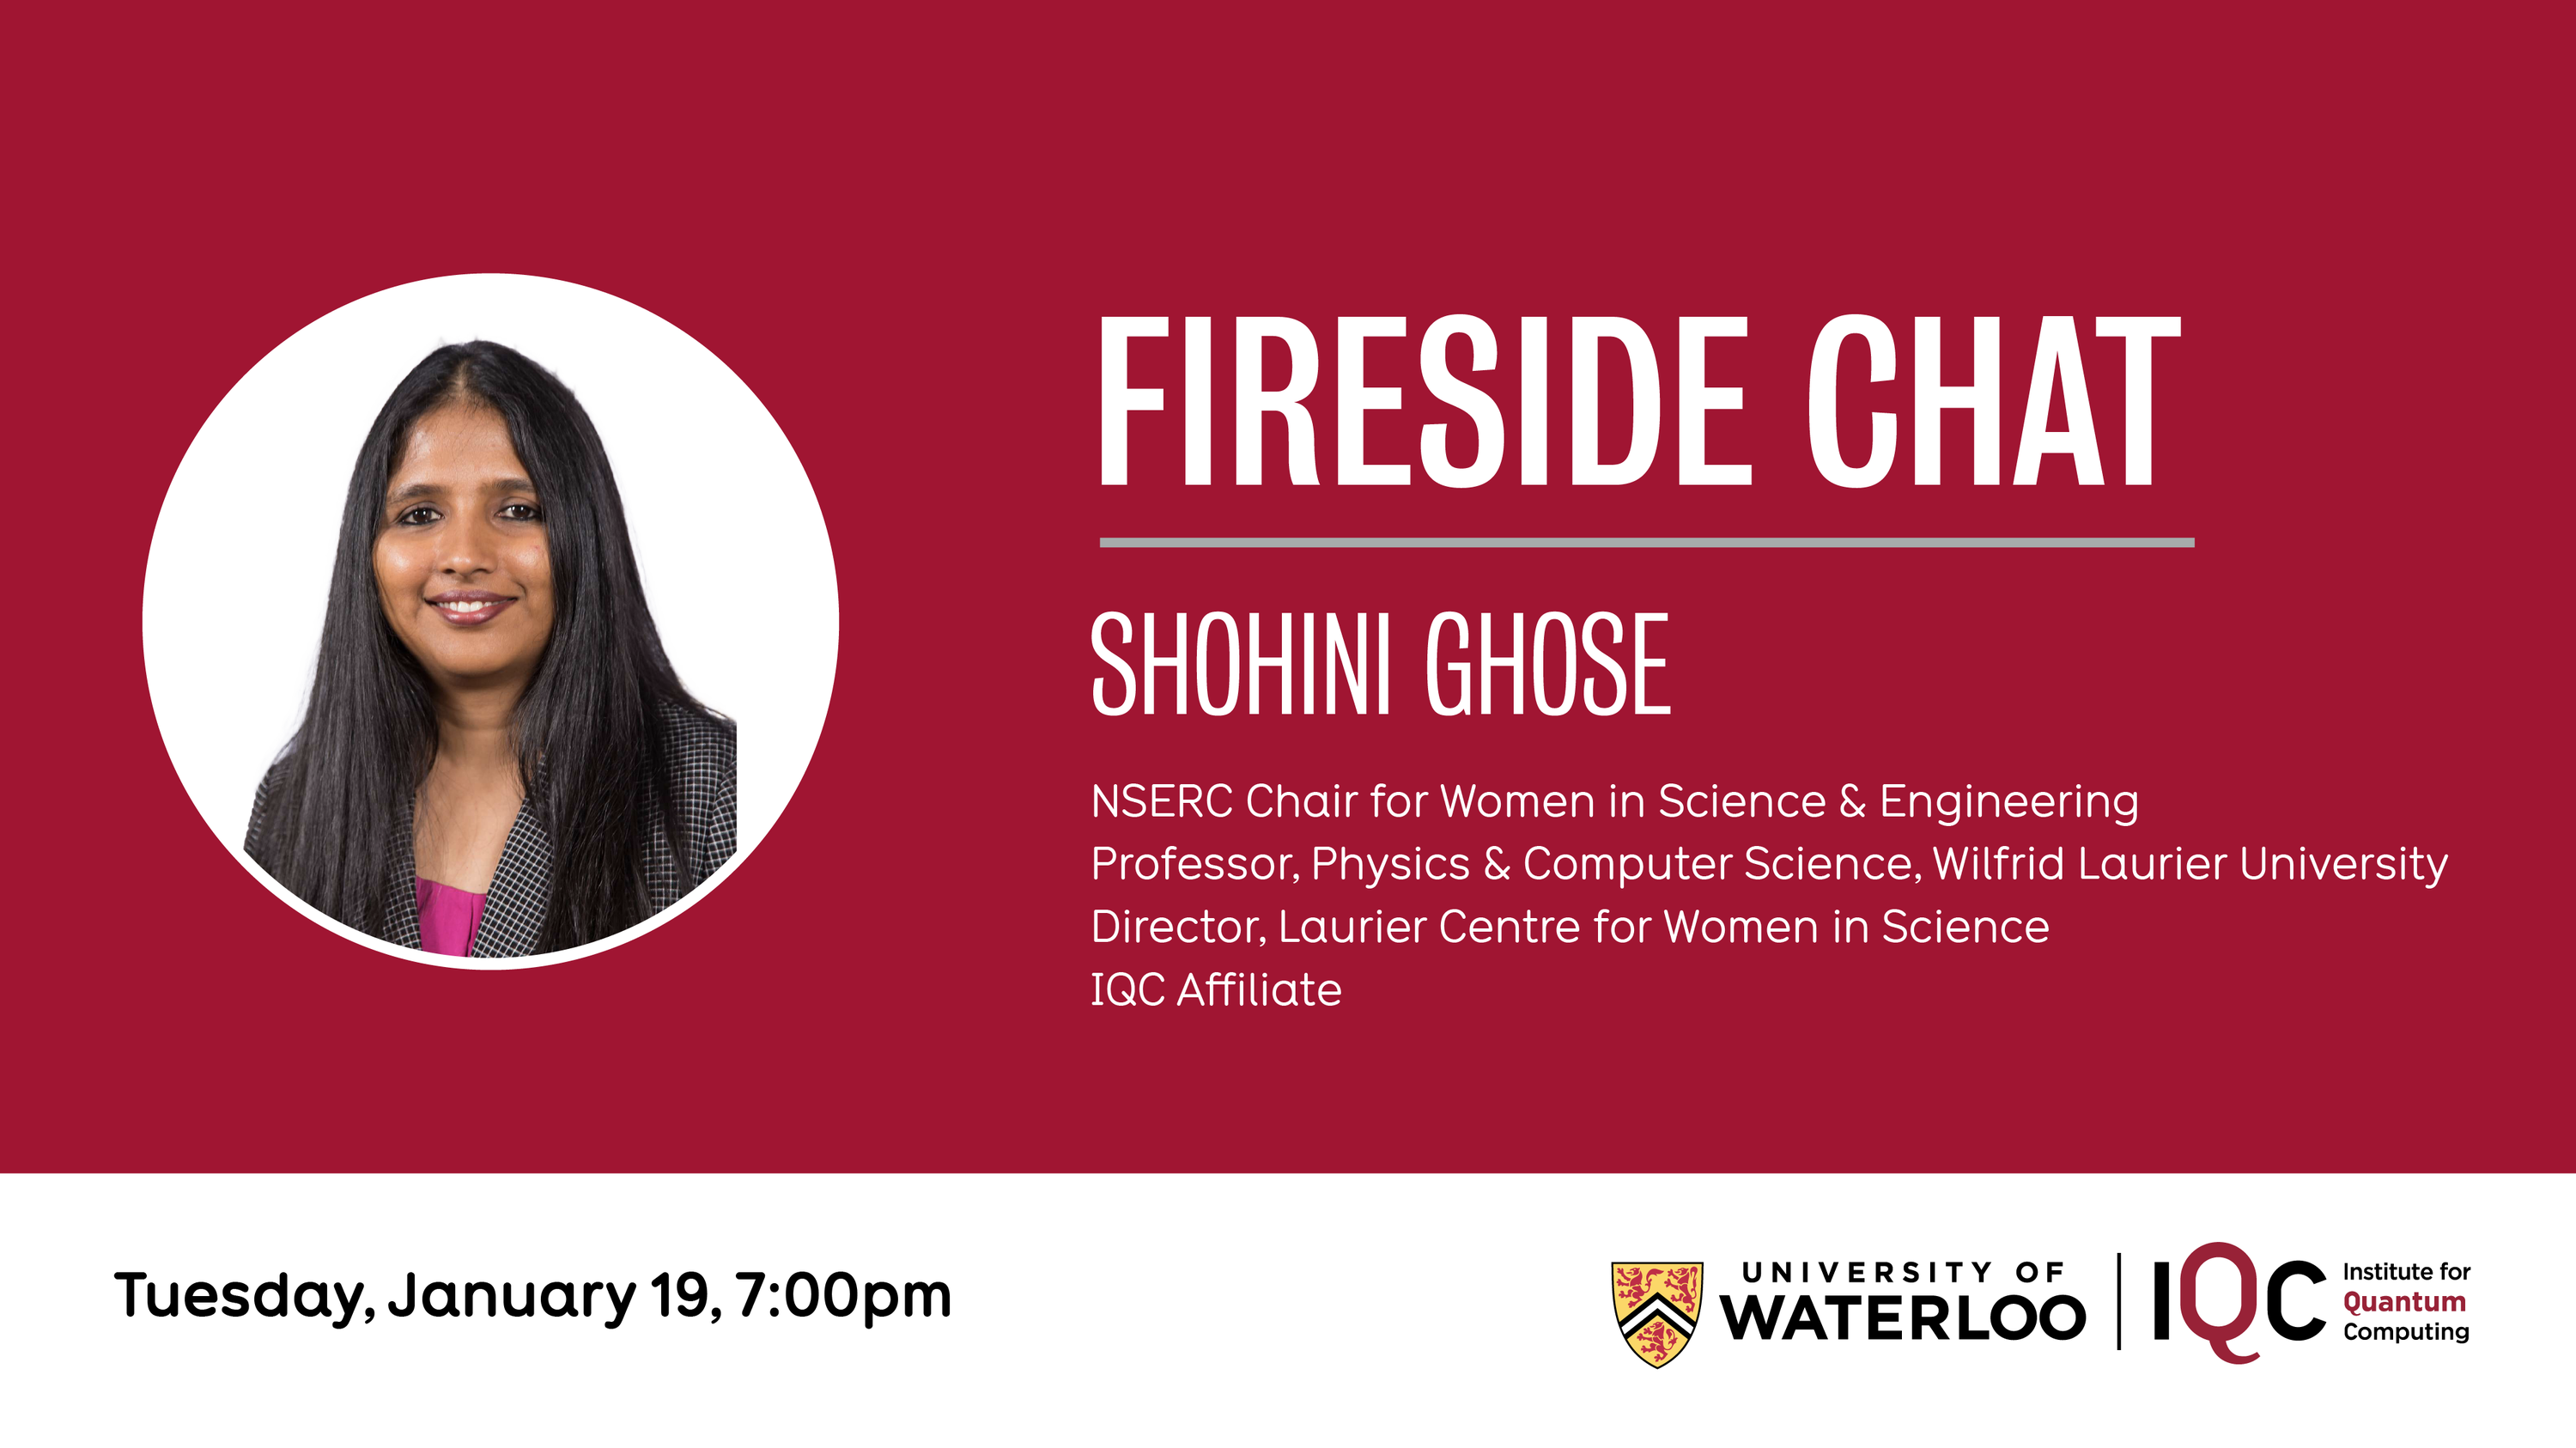 Shohini Ghose, NSERC in Women in Science and Engineering